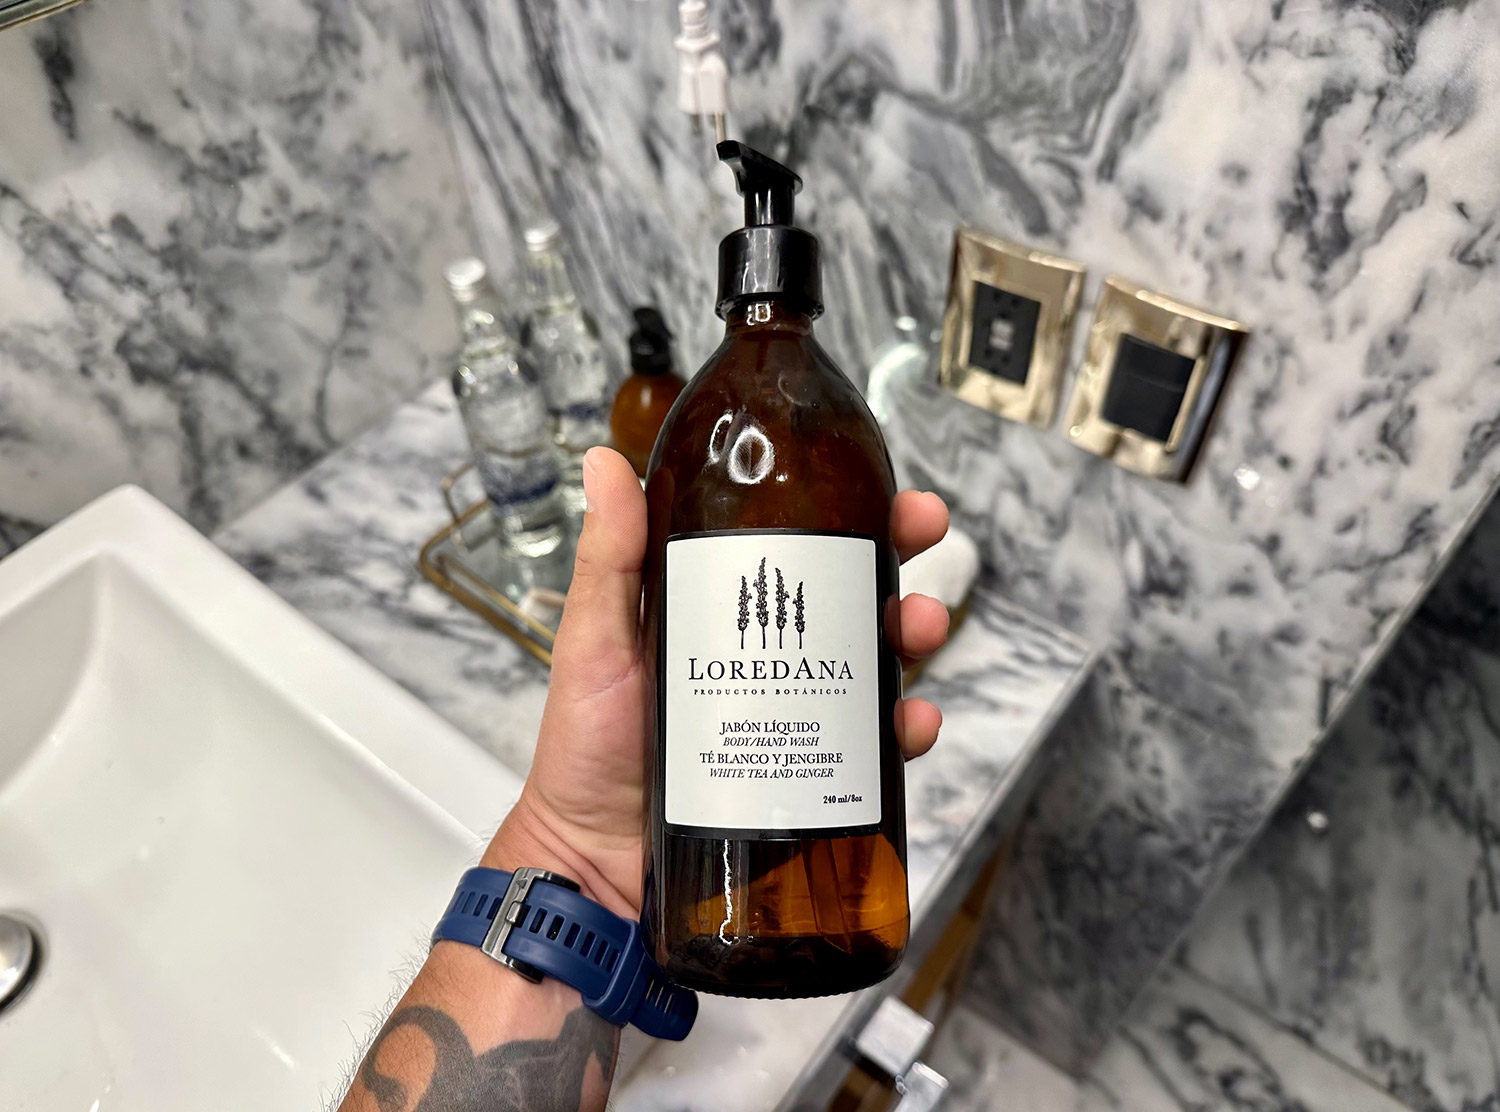 Ignacia Guest House Plastic free: local brand Loredana provides its amenities in robust glass bottles